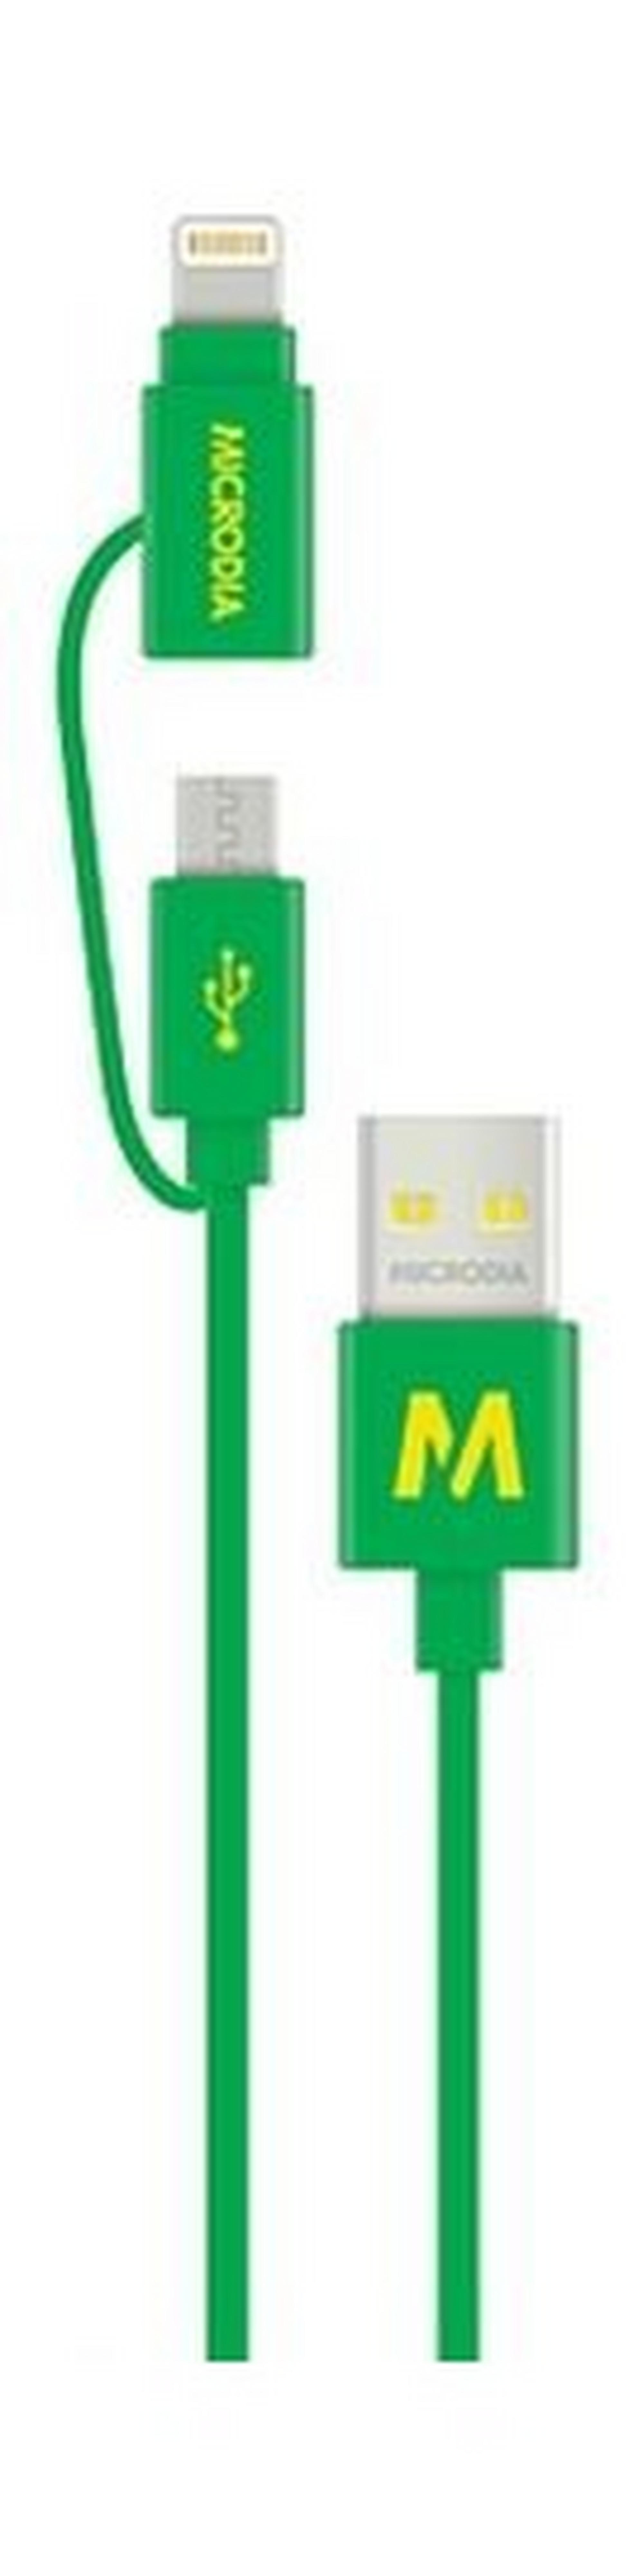 Microdia Fruitywire 2-in-1 Fast Charging Cable - Forest Green